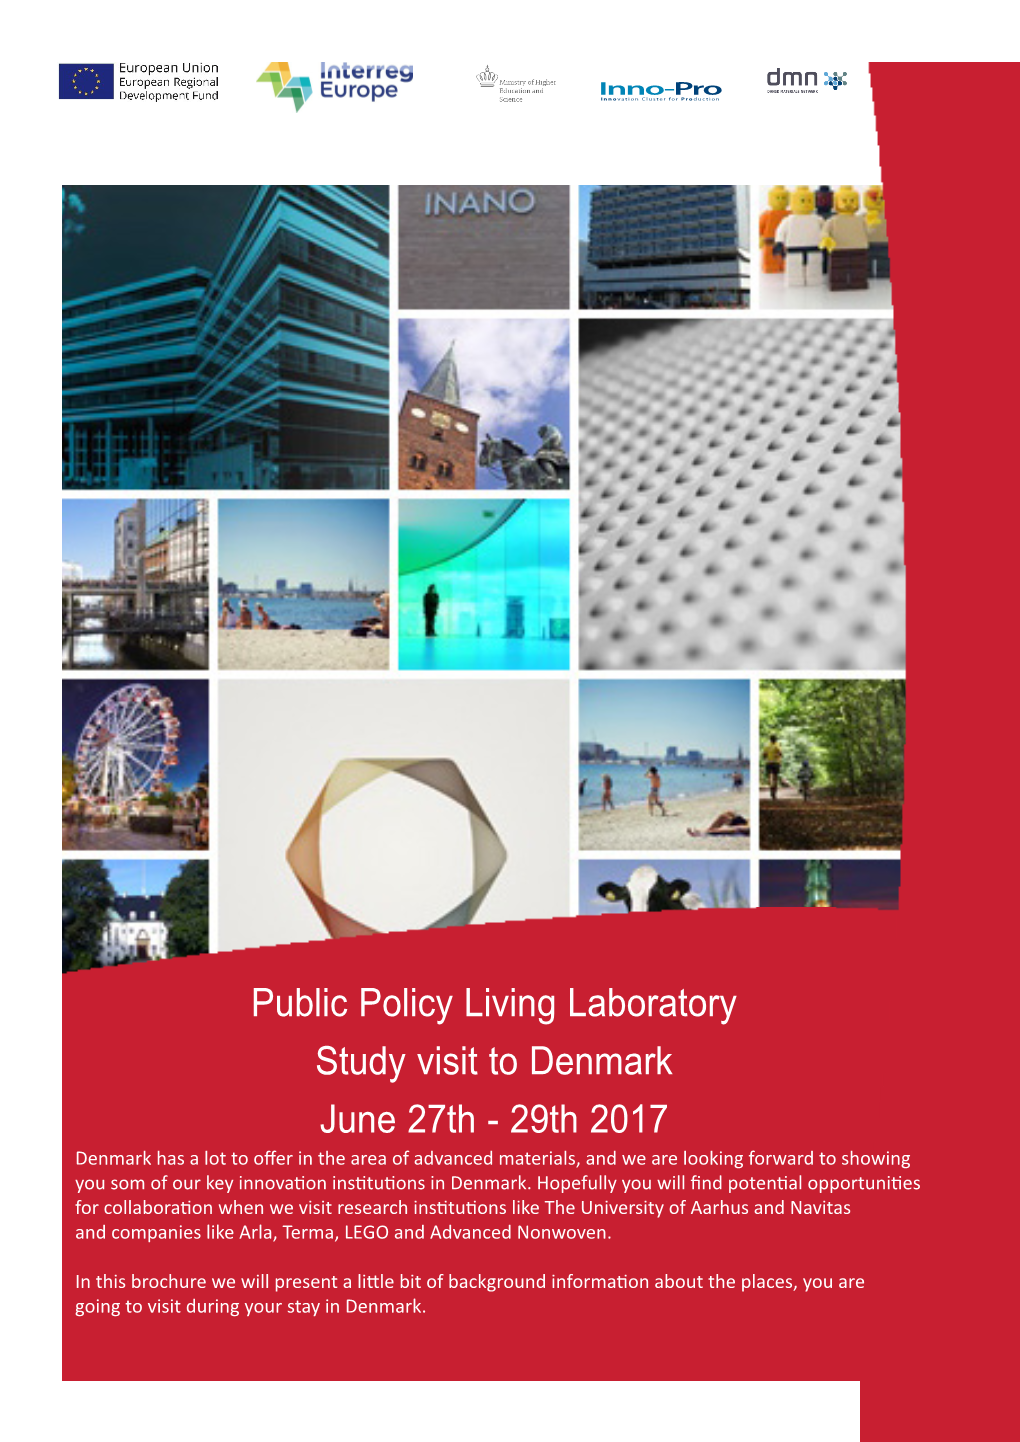 Public Policy Living Laboratory Study Visit to Denmark